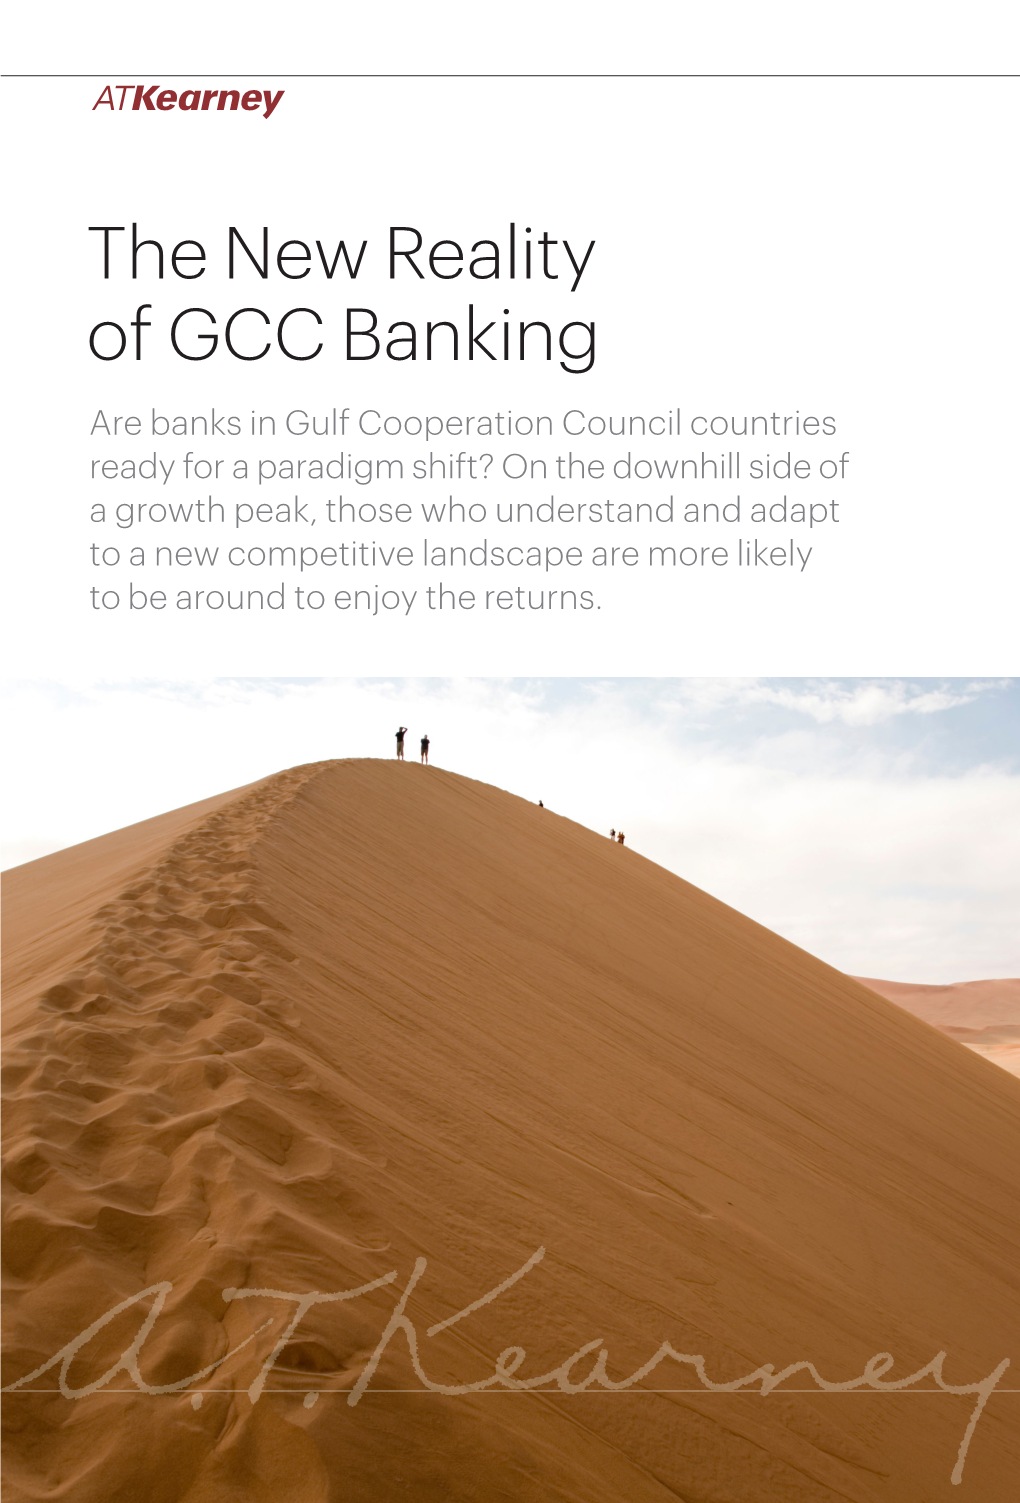 The New Reality of GCC Banking